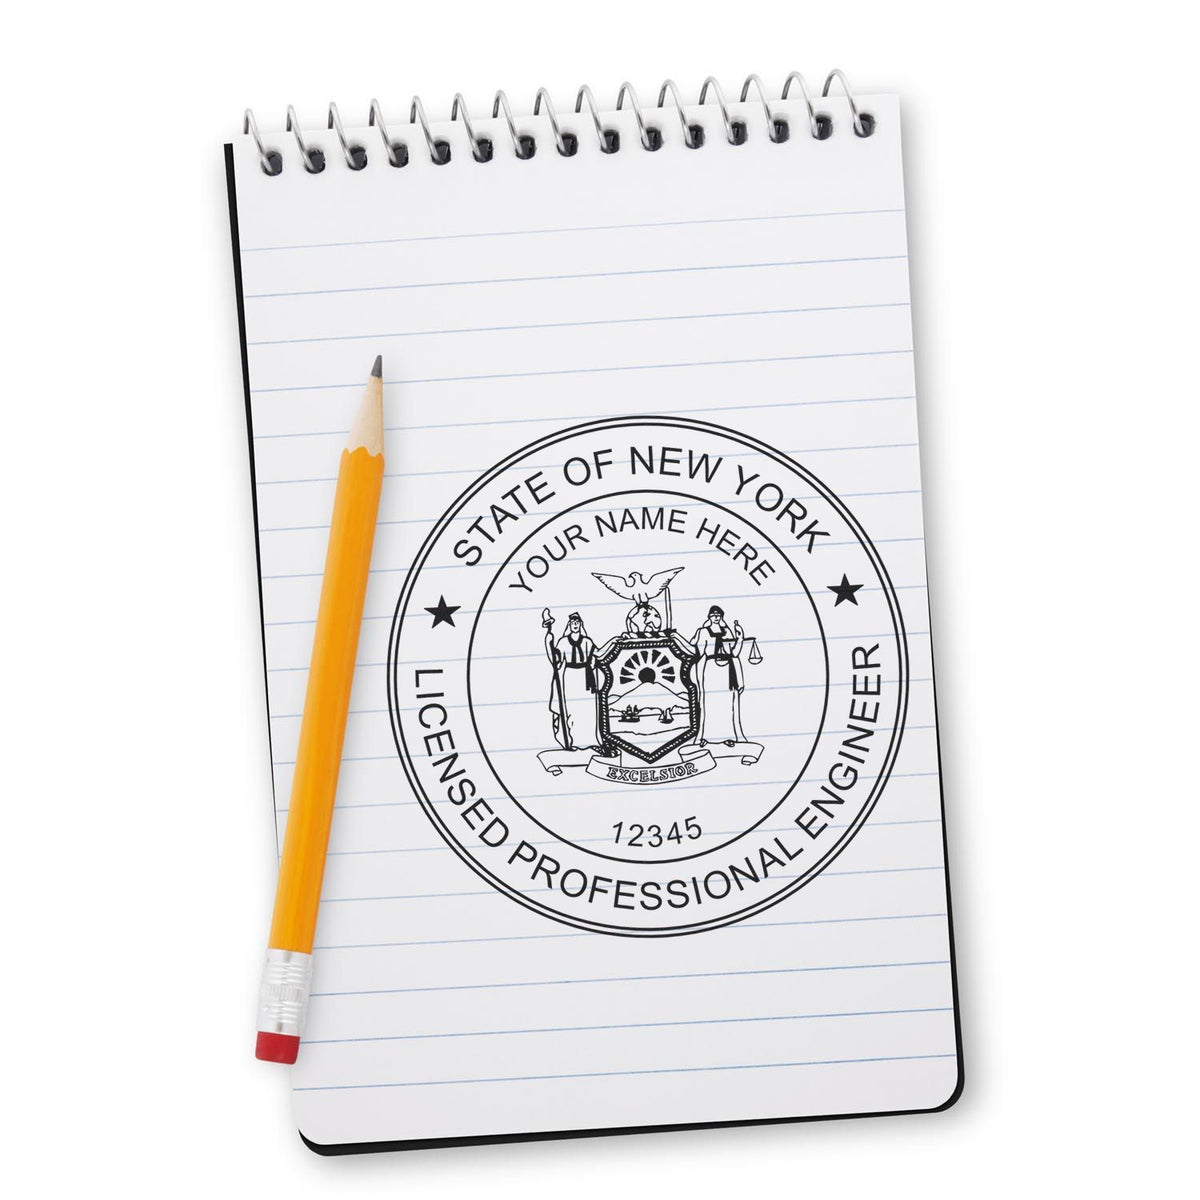 A lifestyle photo showing a stamped image of the New York Professional Engineer Seal Stamp on a piece of paper